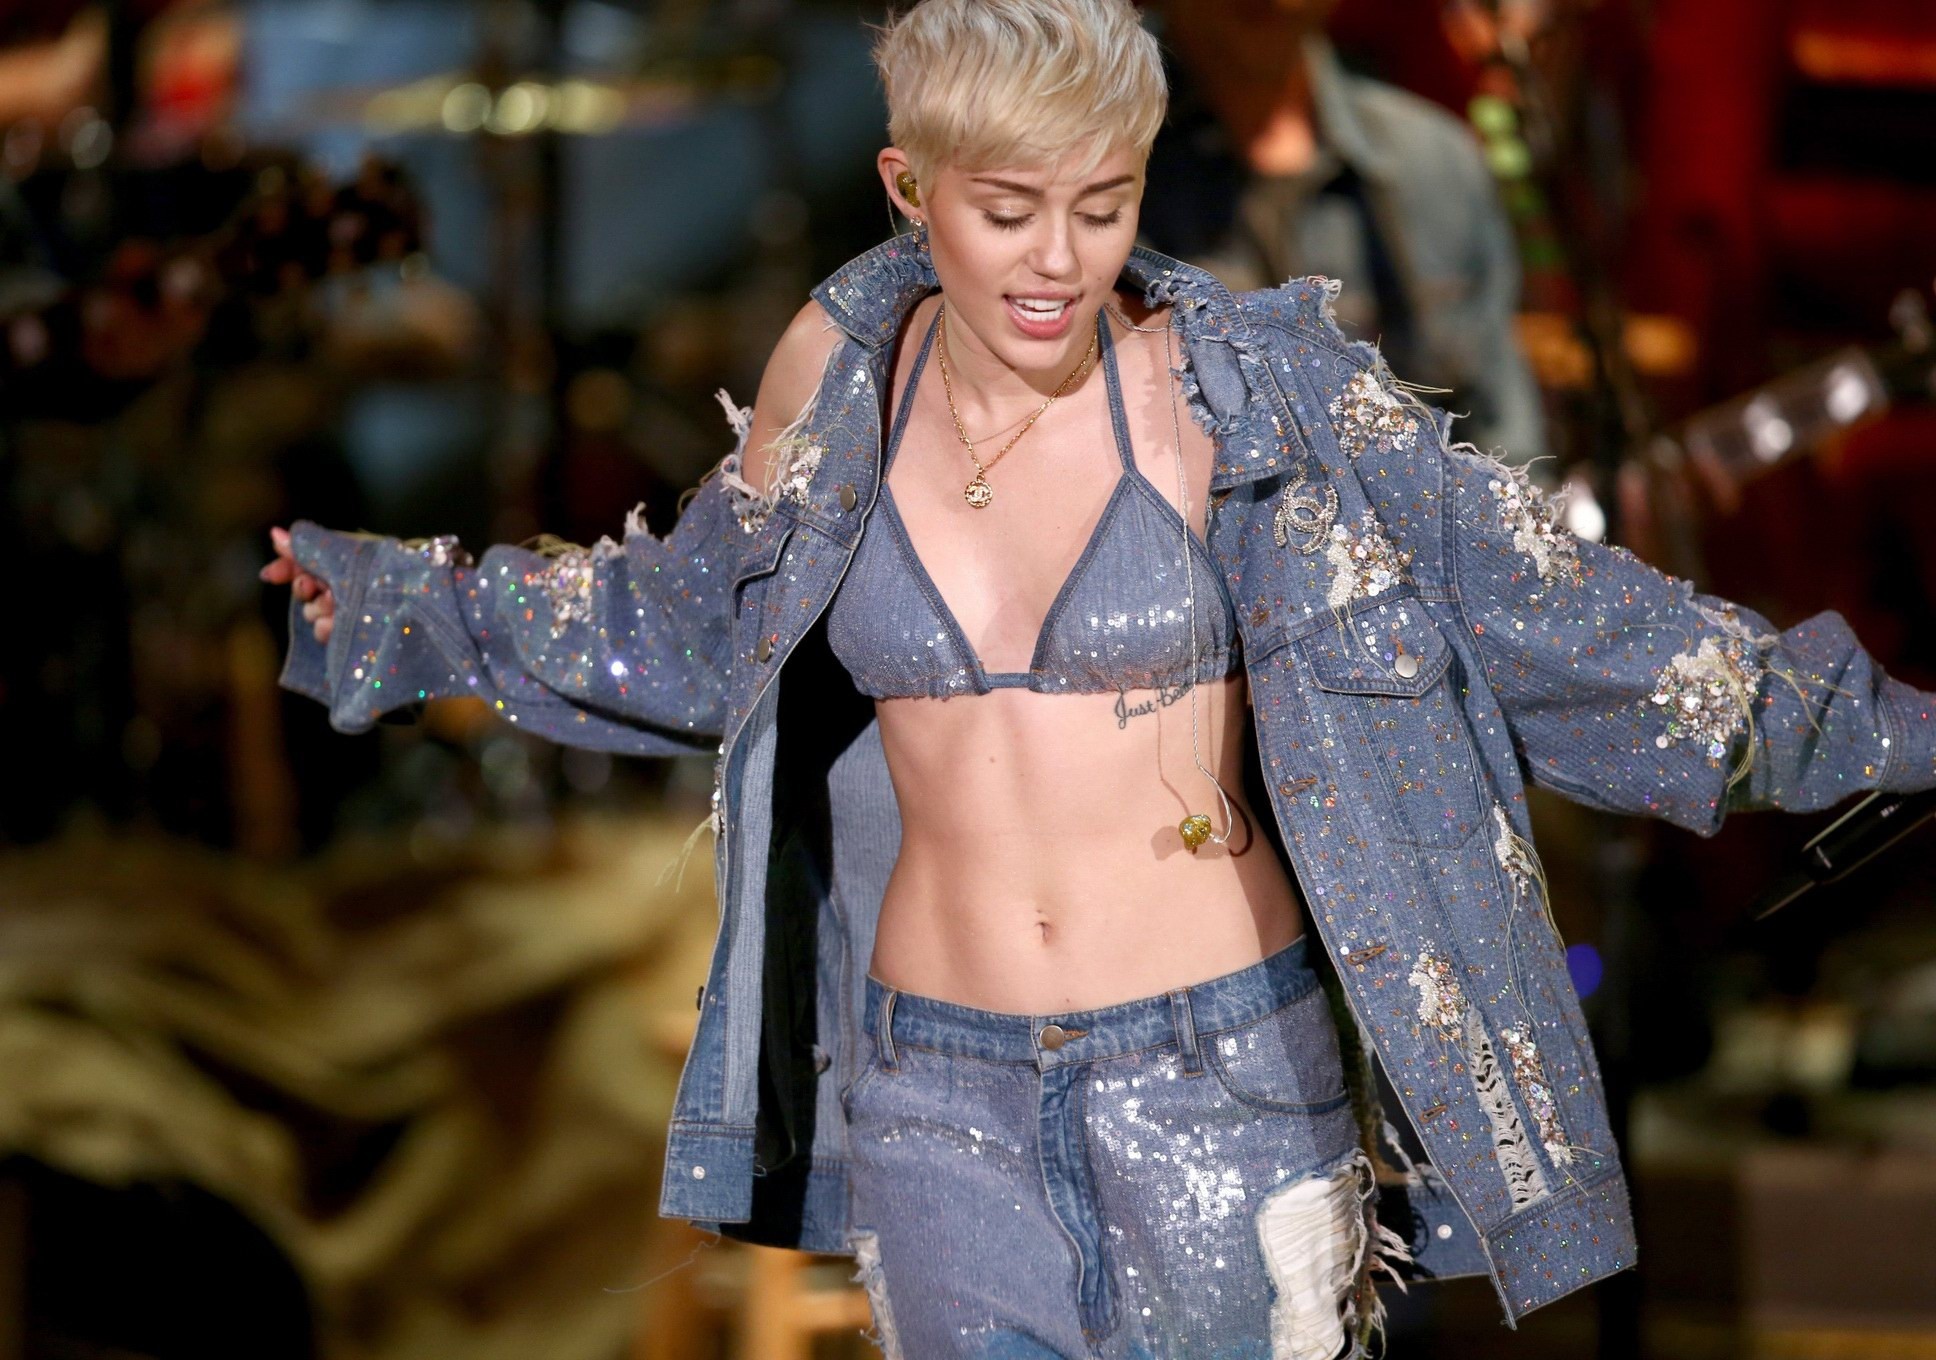 Miley Cyrus perofrming in denim bra  ripped jeans at MTV Unplugged in Hollywood  #75205896